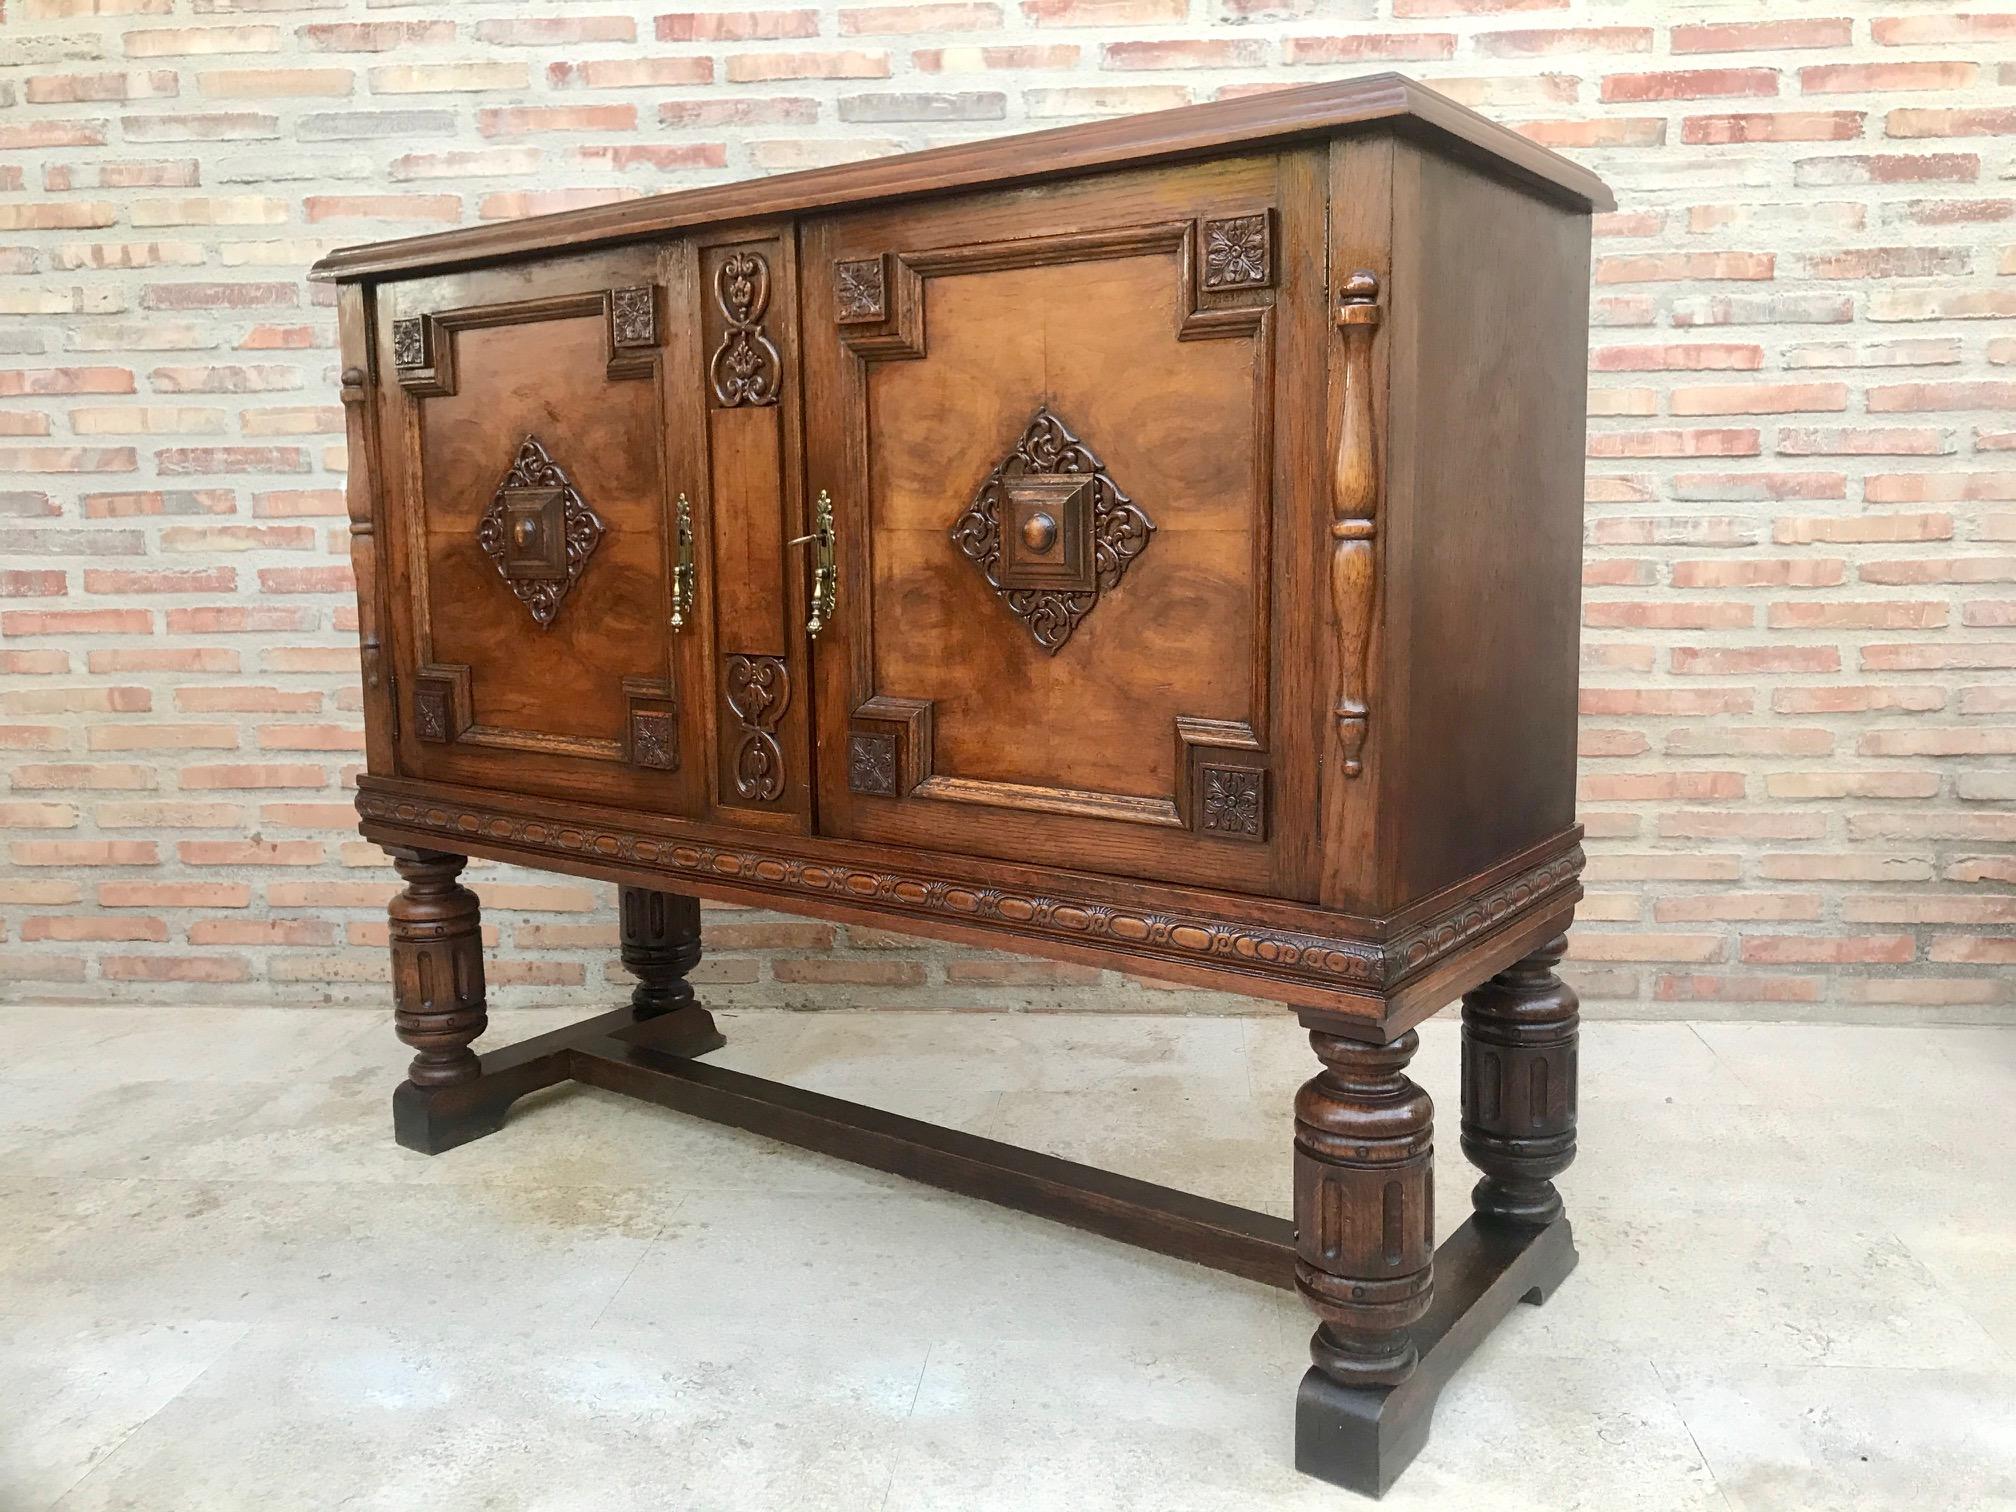 19th century Catalan Spanish buffet with two doors.

We have a matching large buffet.